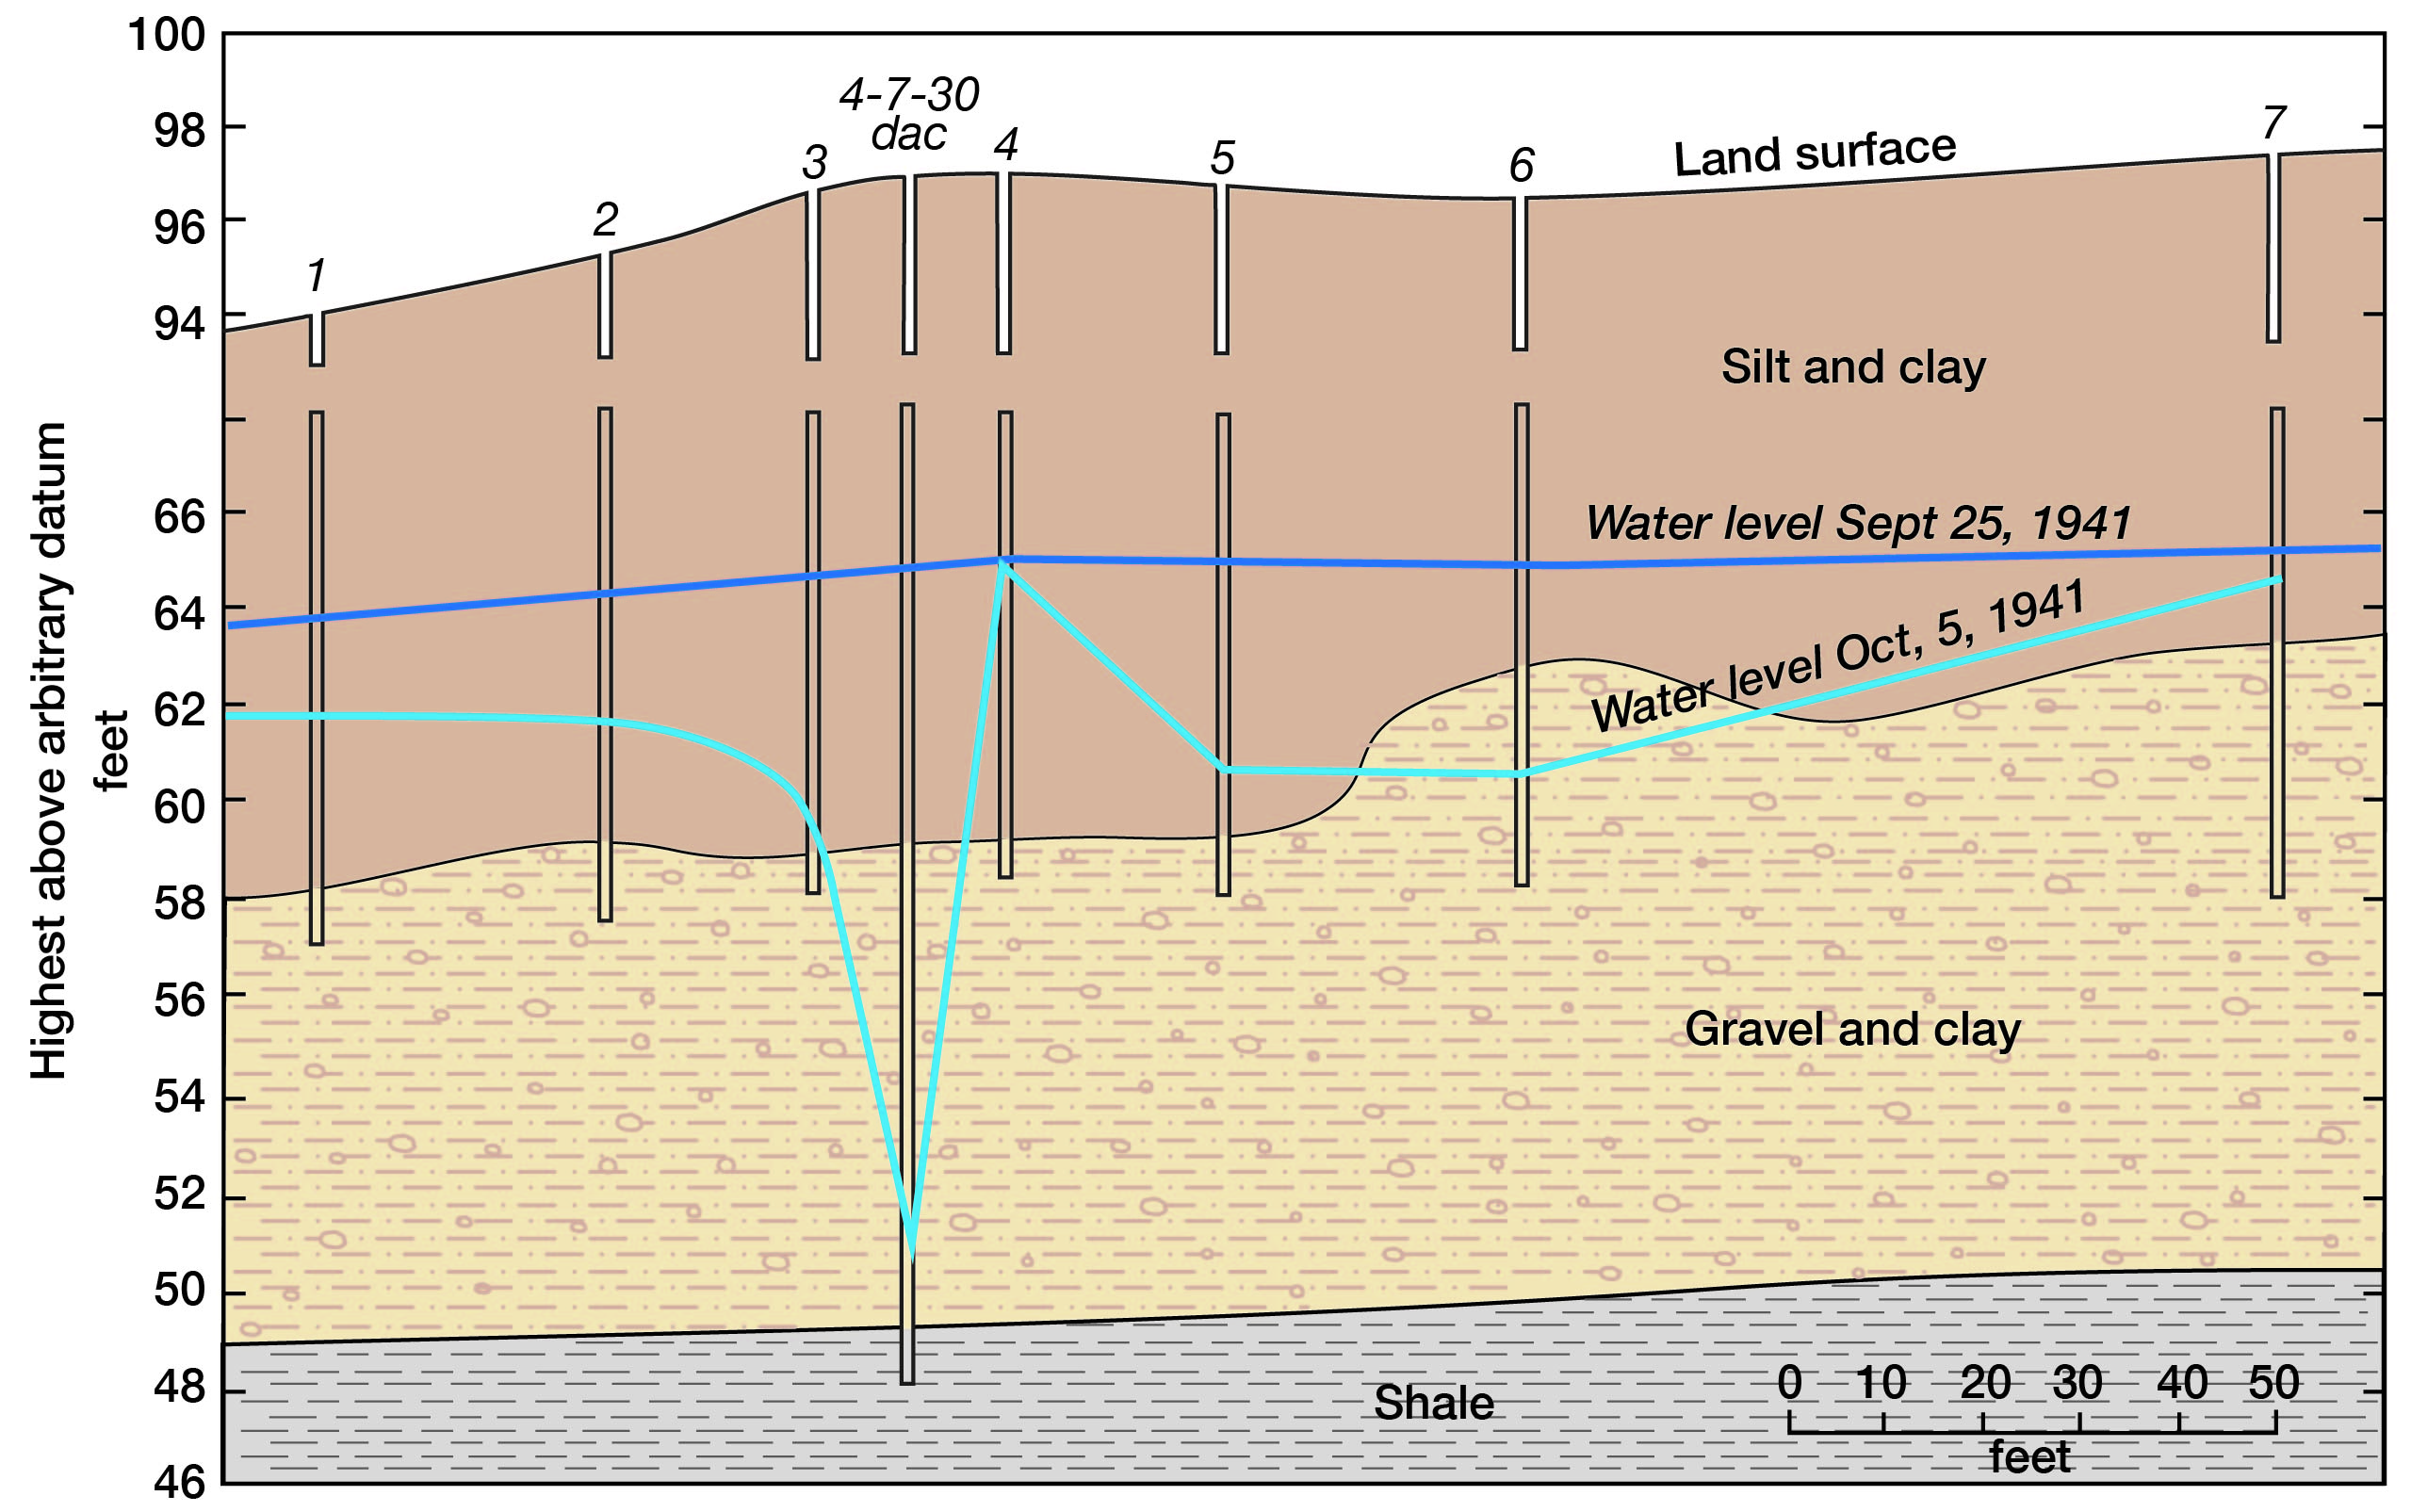 Diagram shows water levels and rock types intersected by observation wells.